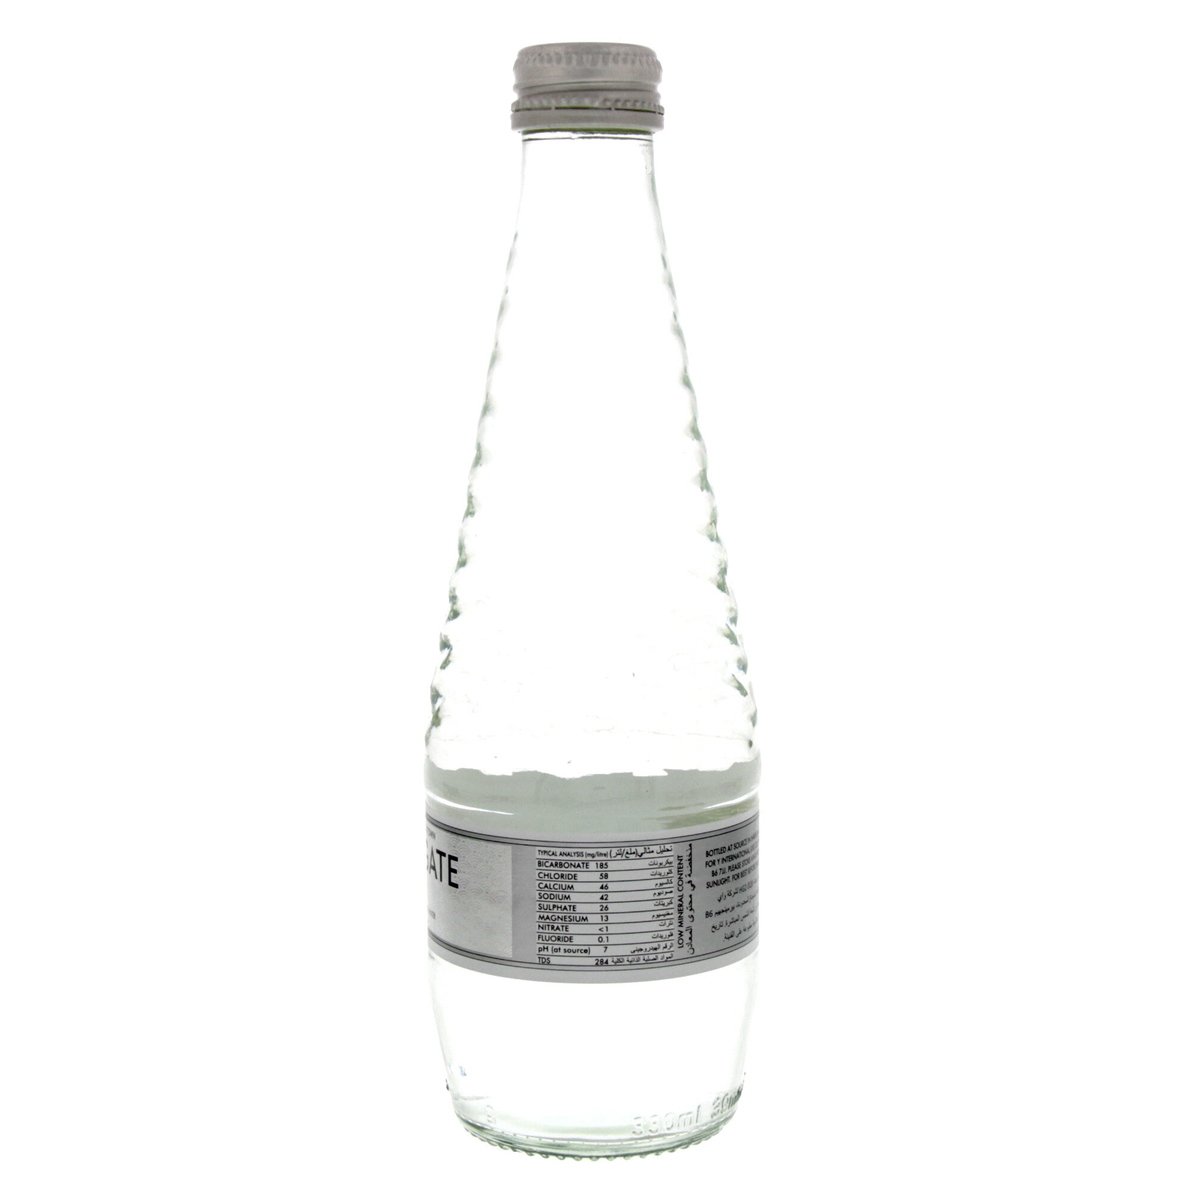 Harrogate Spring Carbonated Mineral Water 330ml